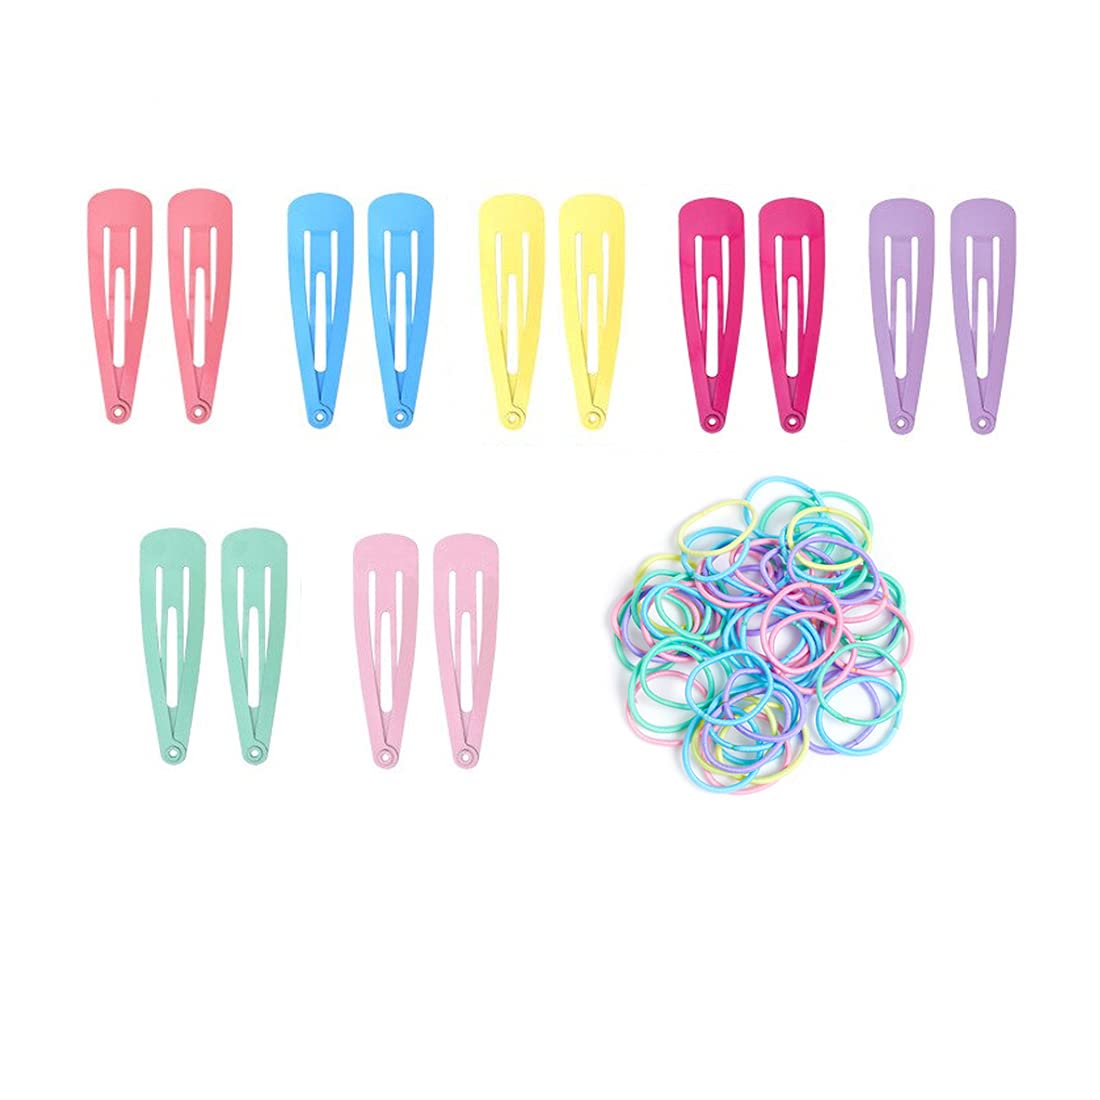 Melbees by Yellow Chimes Hair Clips for Girls Kids Hair Clip Hair Accessories for Girls Baby's Multicolor 7 Pairs Snap Hair Clips With 100 Pcs Rubber Bands Set for Kids Tic Tac Clips for Baby Teens Toddlers